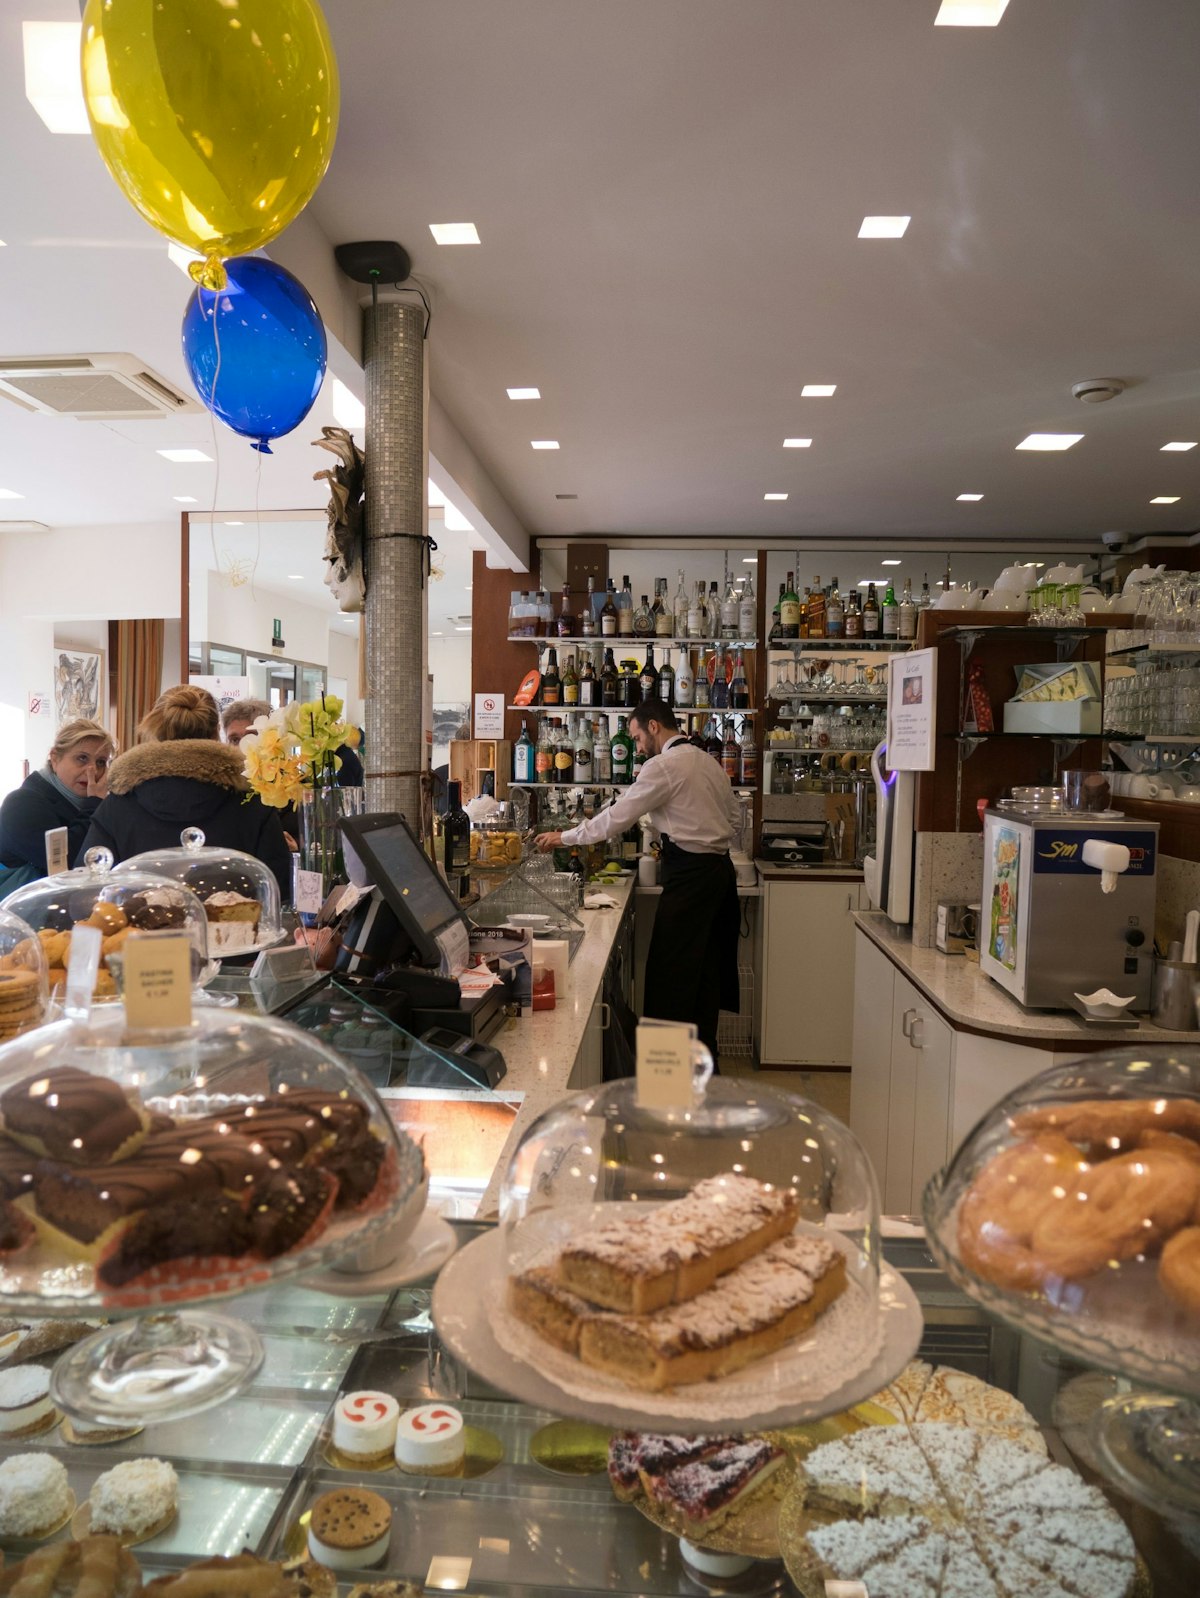 Le Café, some of the delicious cakes and pastries.